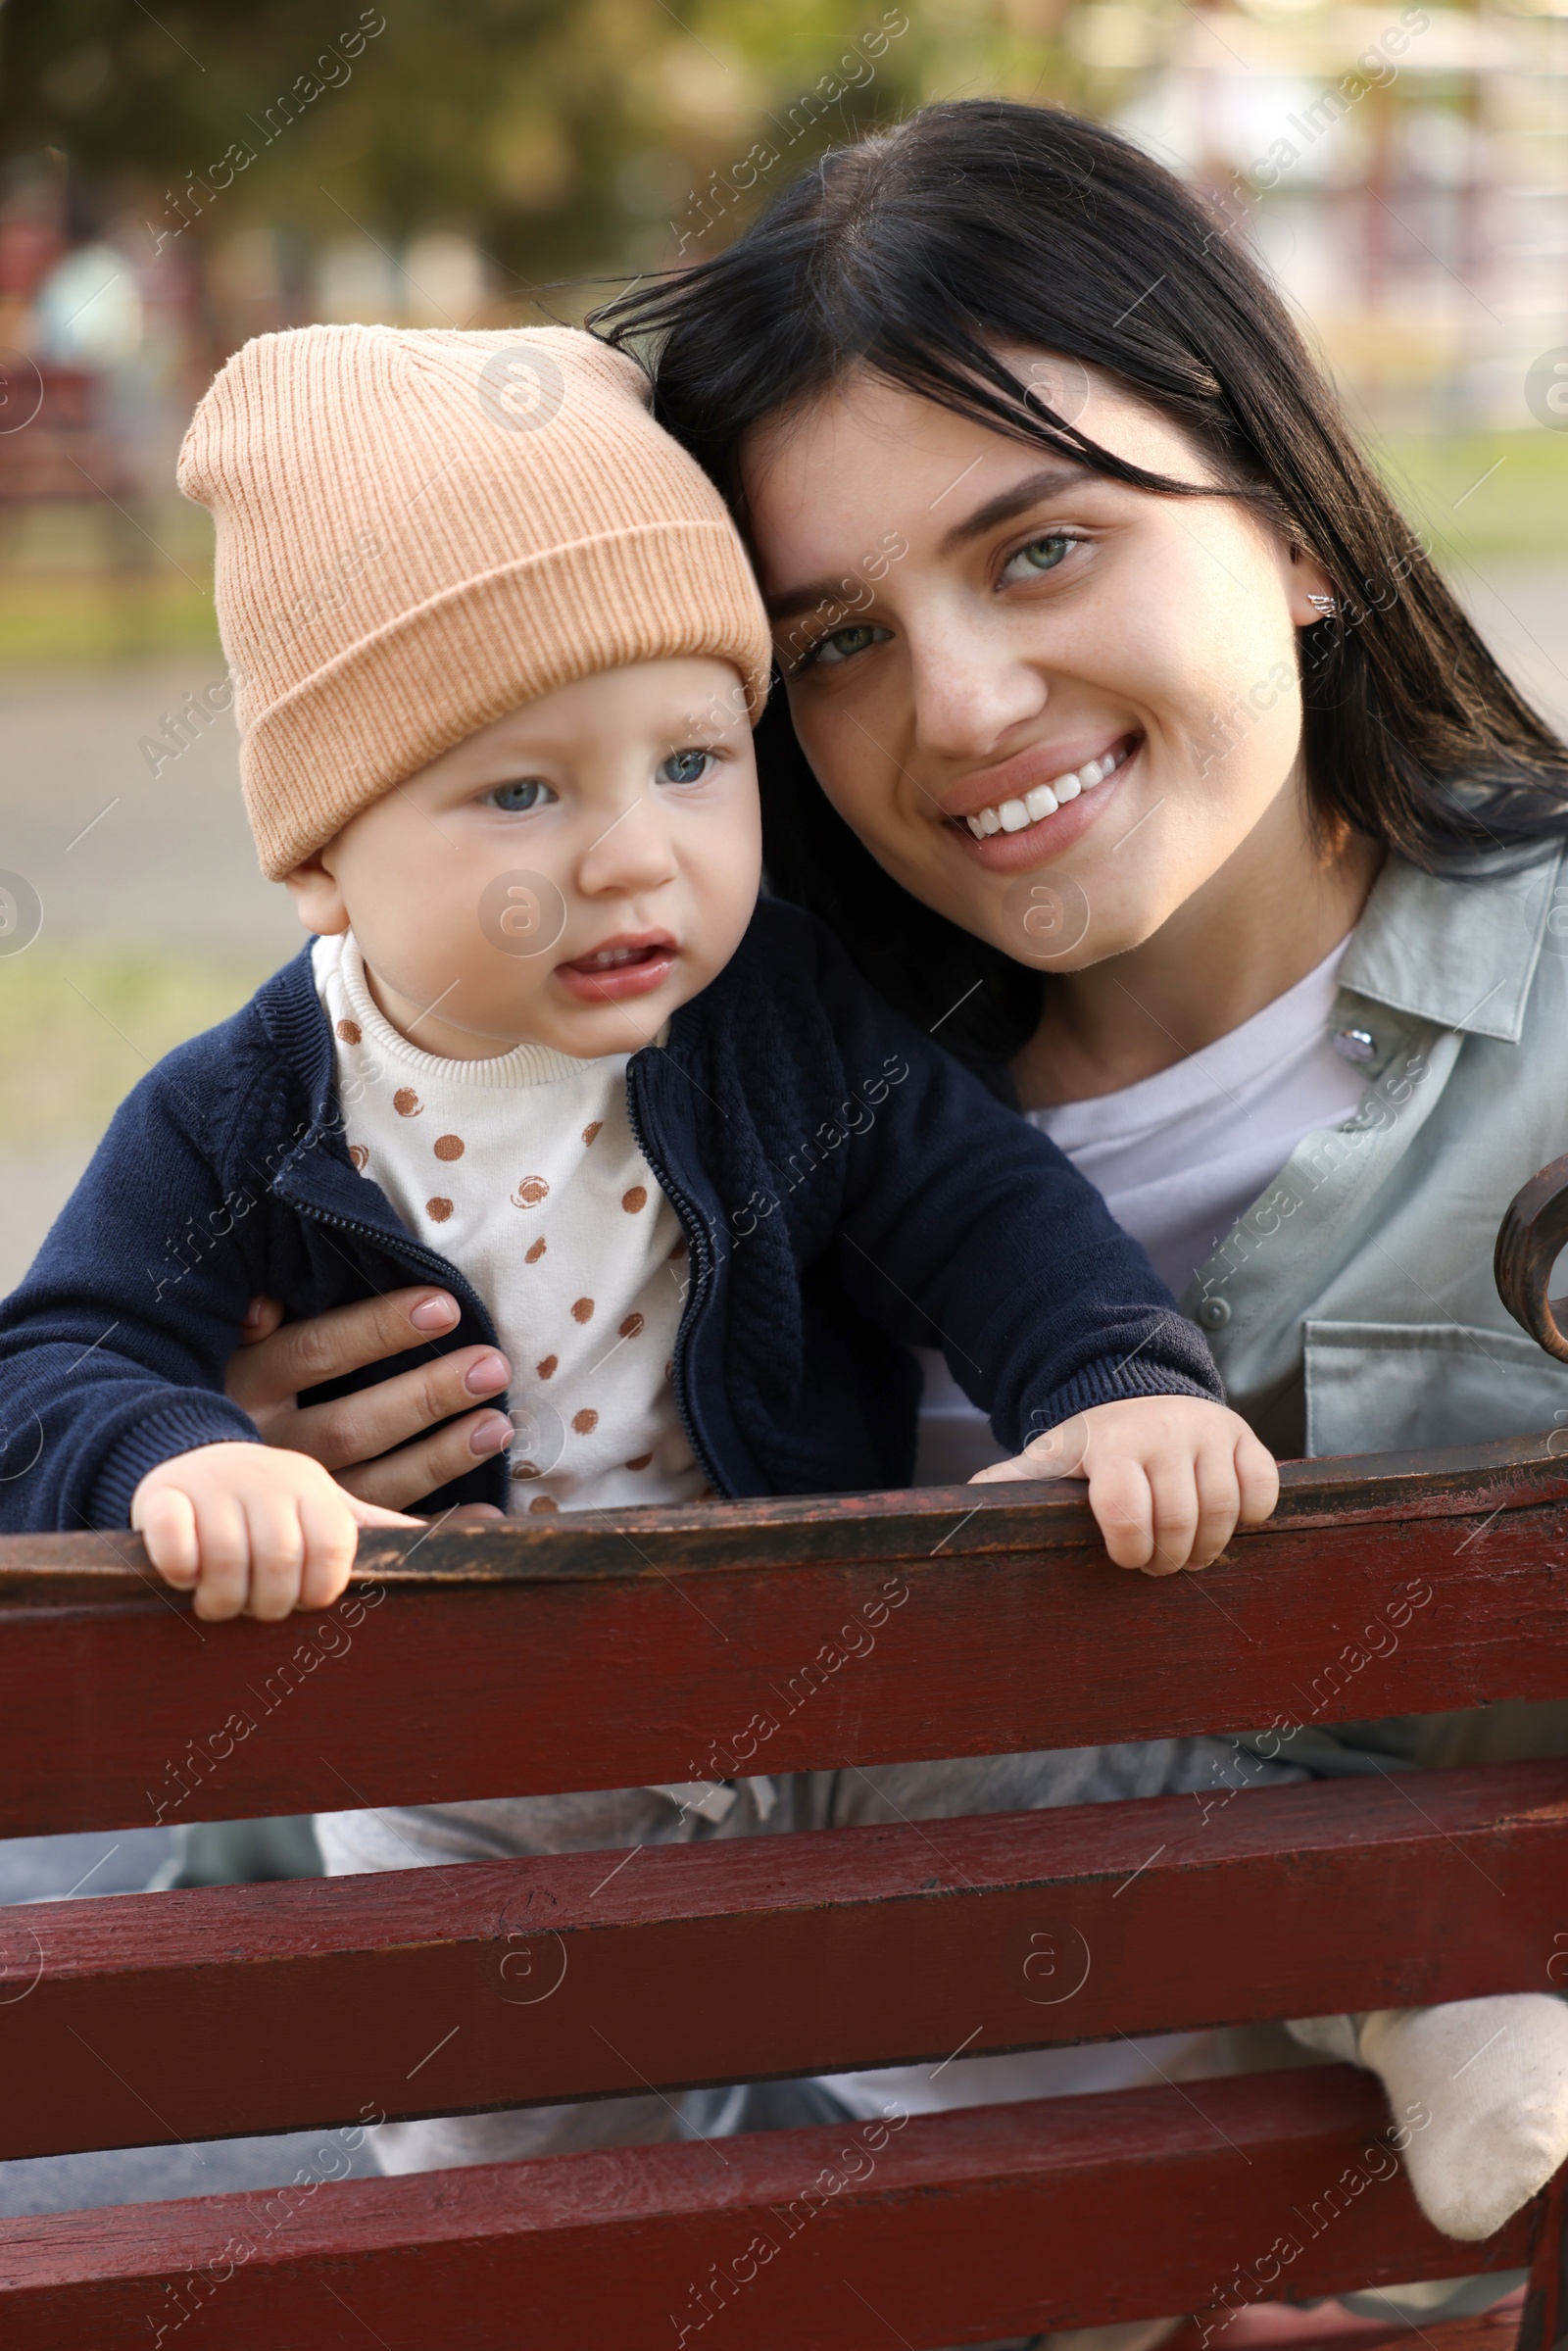 Photo of Family portrait of happy mother and her baby on bench in park